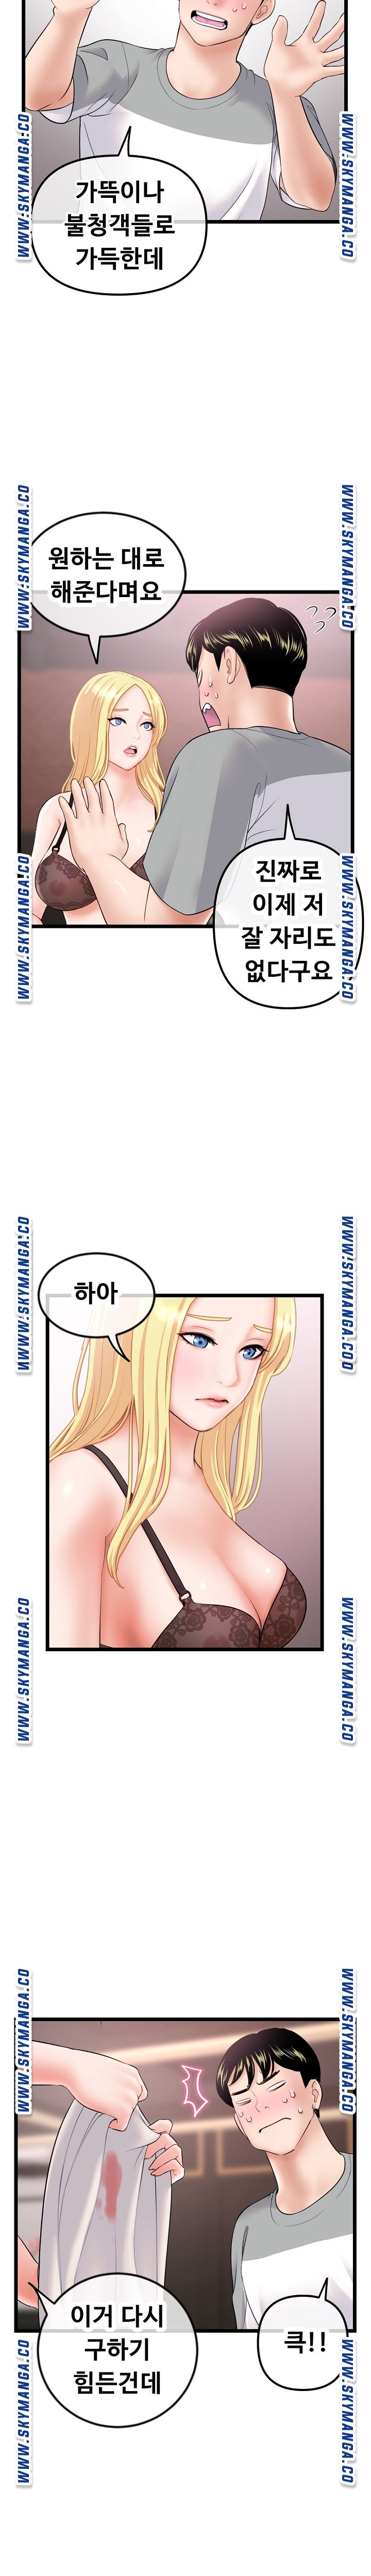 Late night PC Room Raw - Chapter 31 Page 6